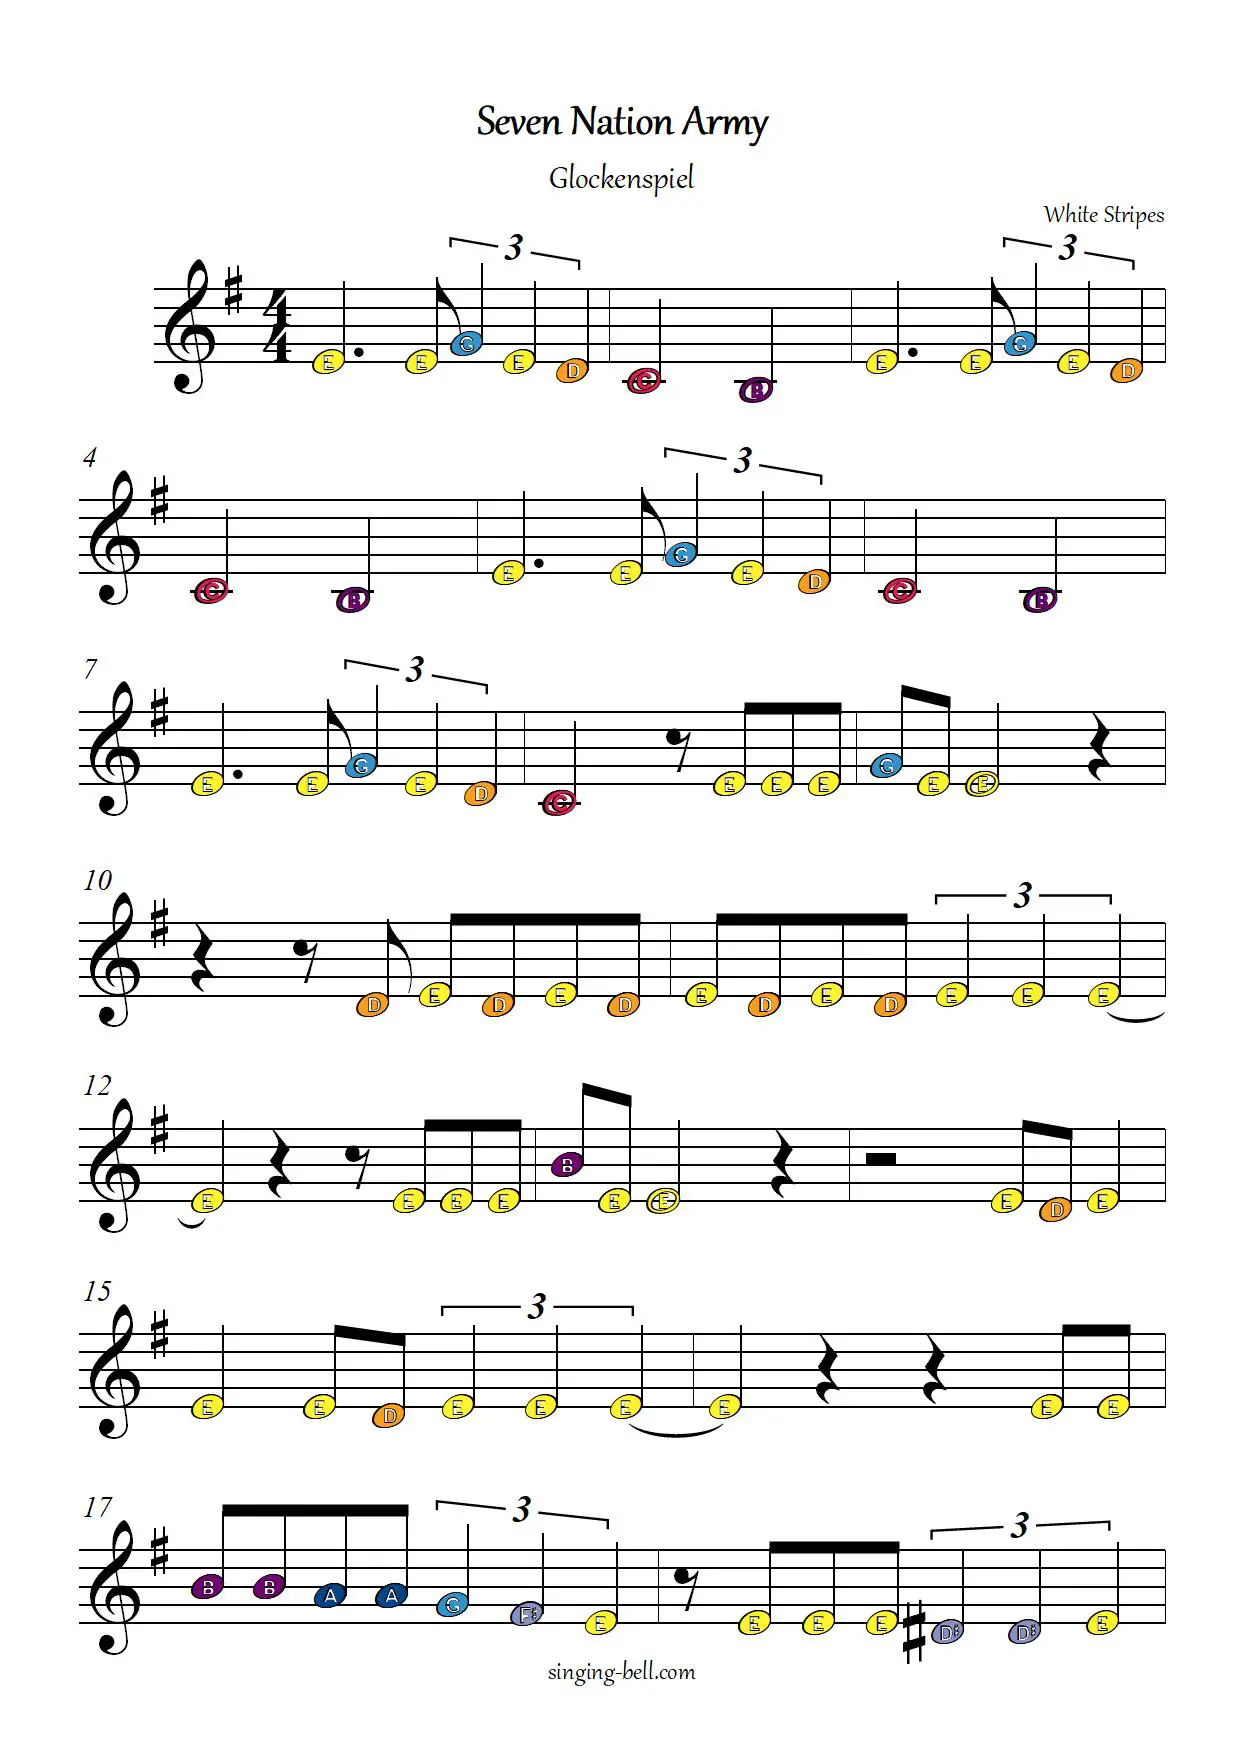 Seven Nation Army free xylophone glockenspiel sheet music color notes chart pdf page-1